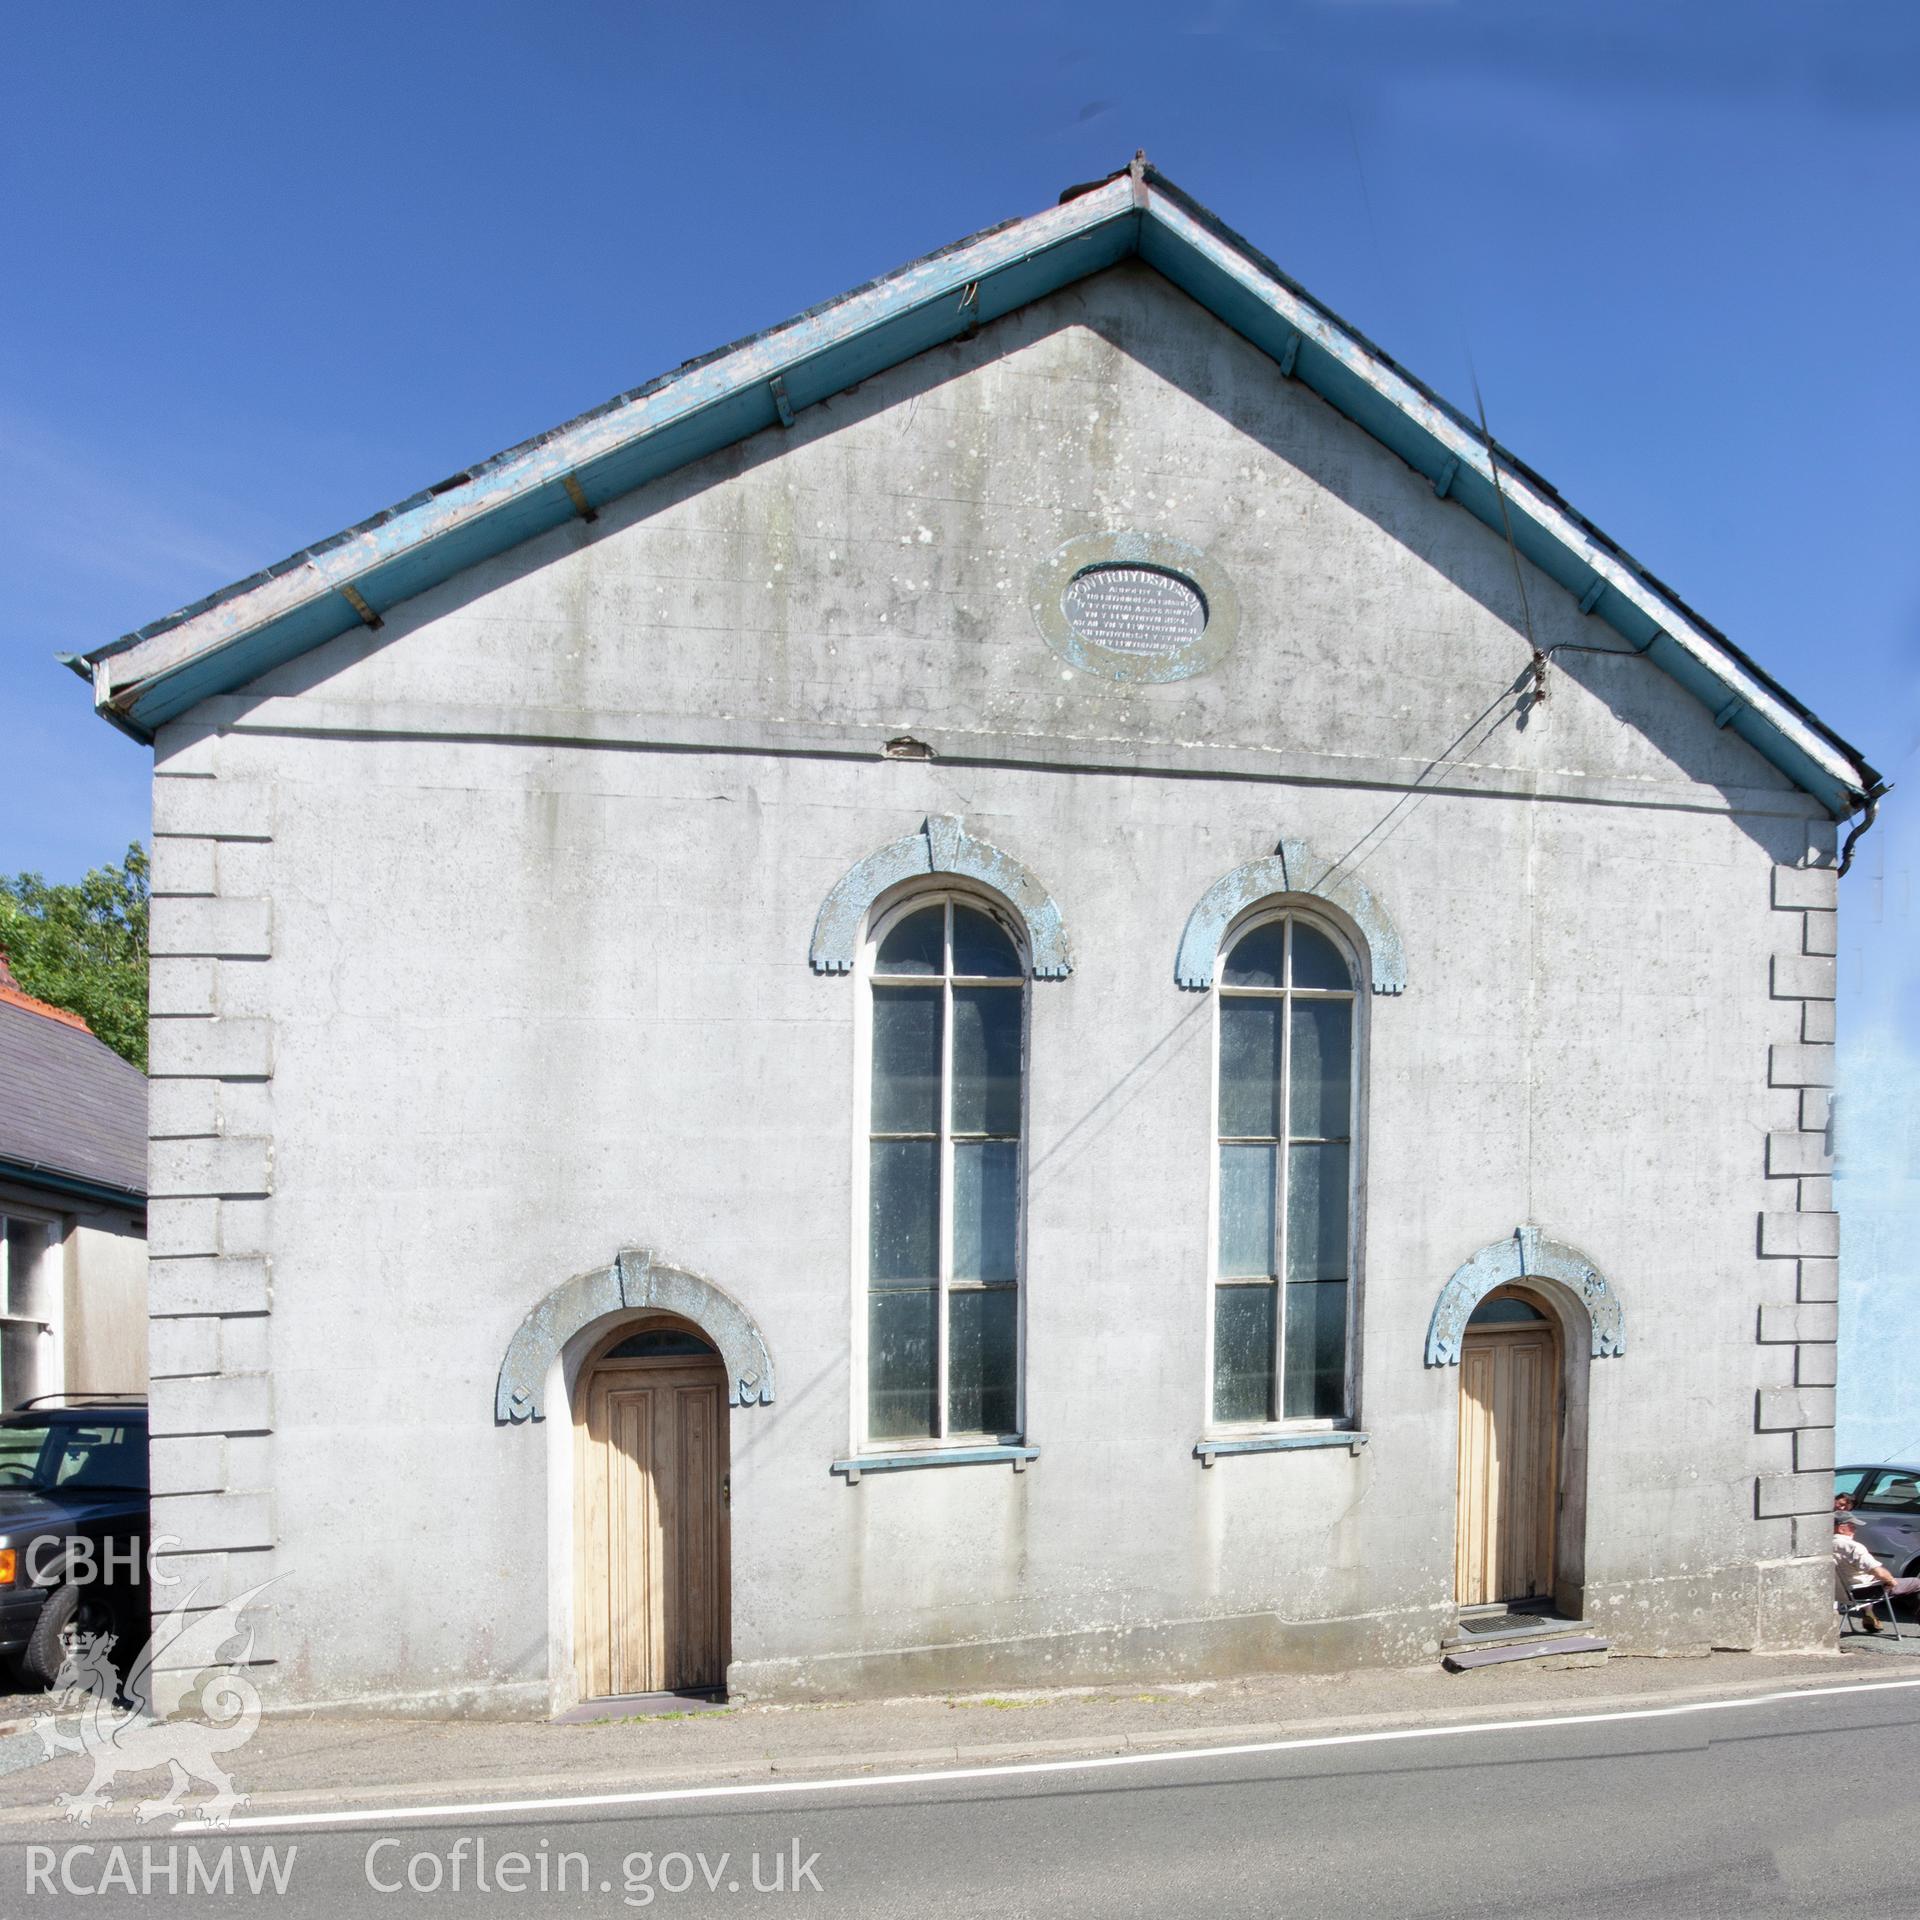 Colour photograph showing front elevation and entrance of Pontsaeson Welsh Calvinistic Methodist Chapel, Pont-rhyd Saeson. Photographed by Richard Barrett on 24th June 2018.